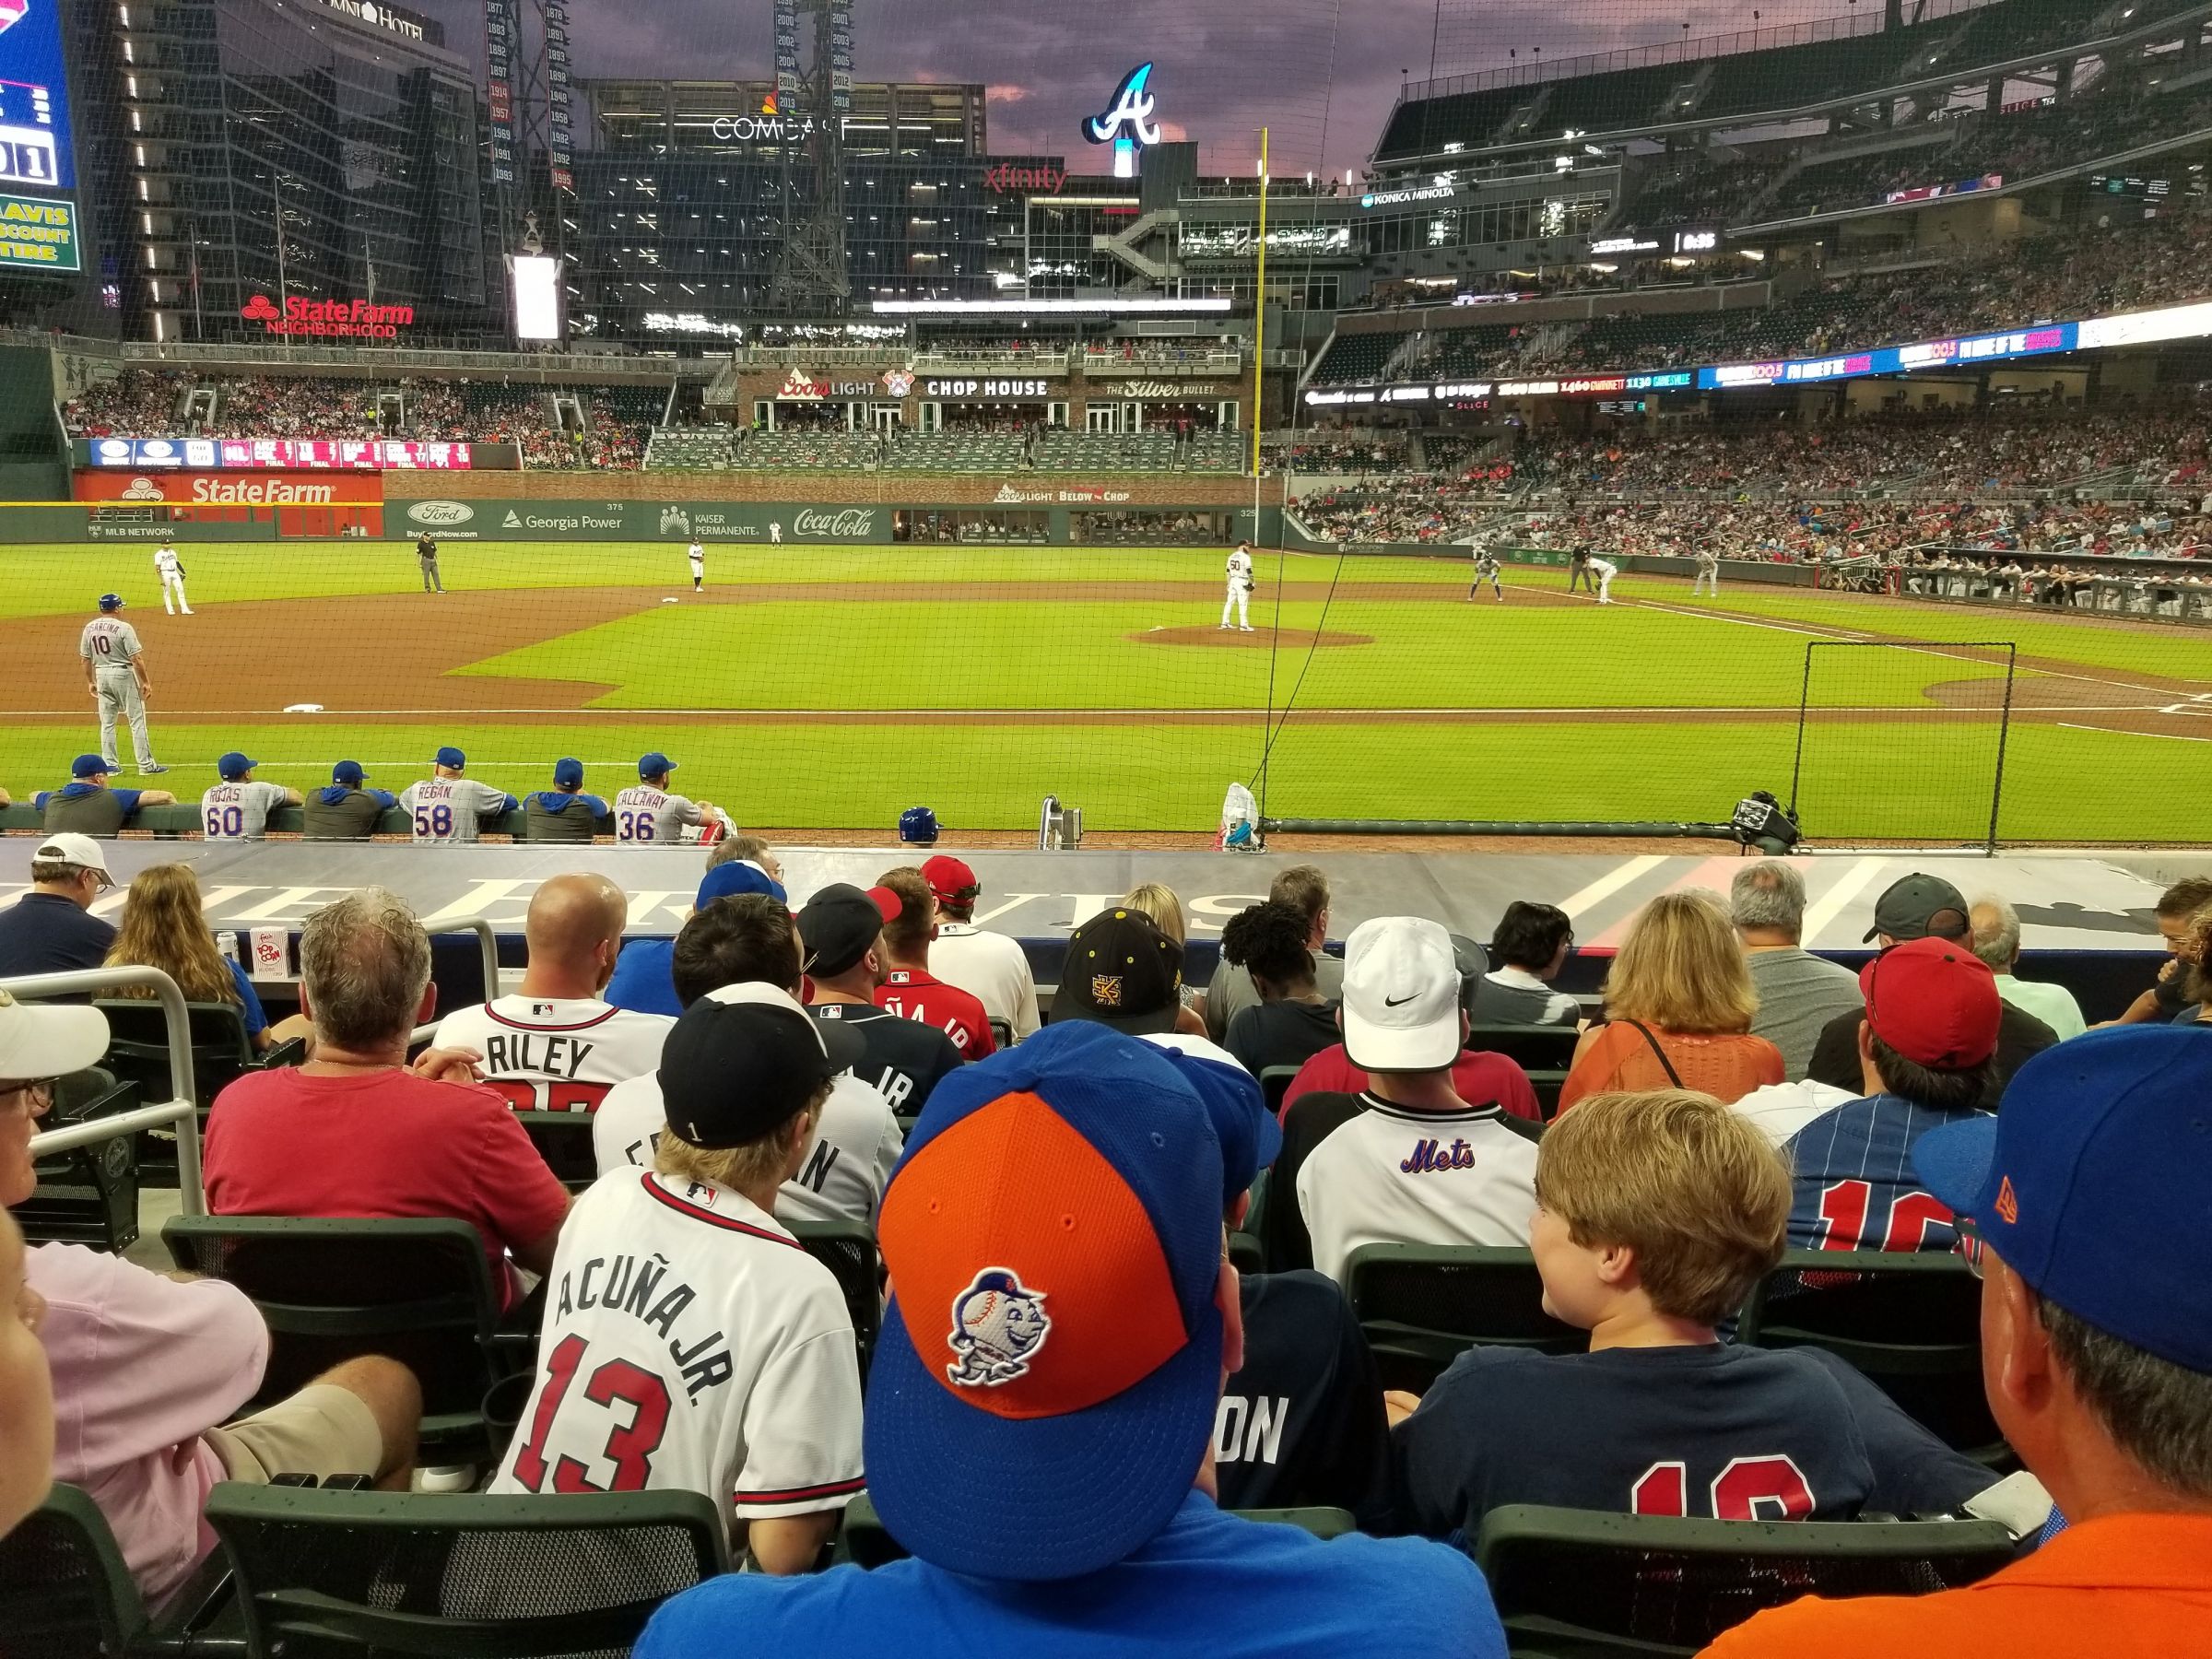 section 31, row 12 seat view  - truist park